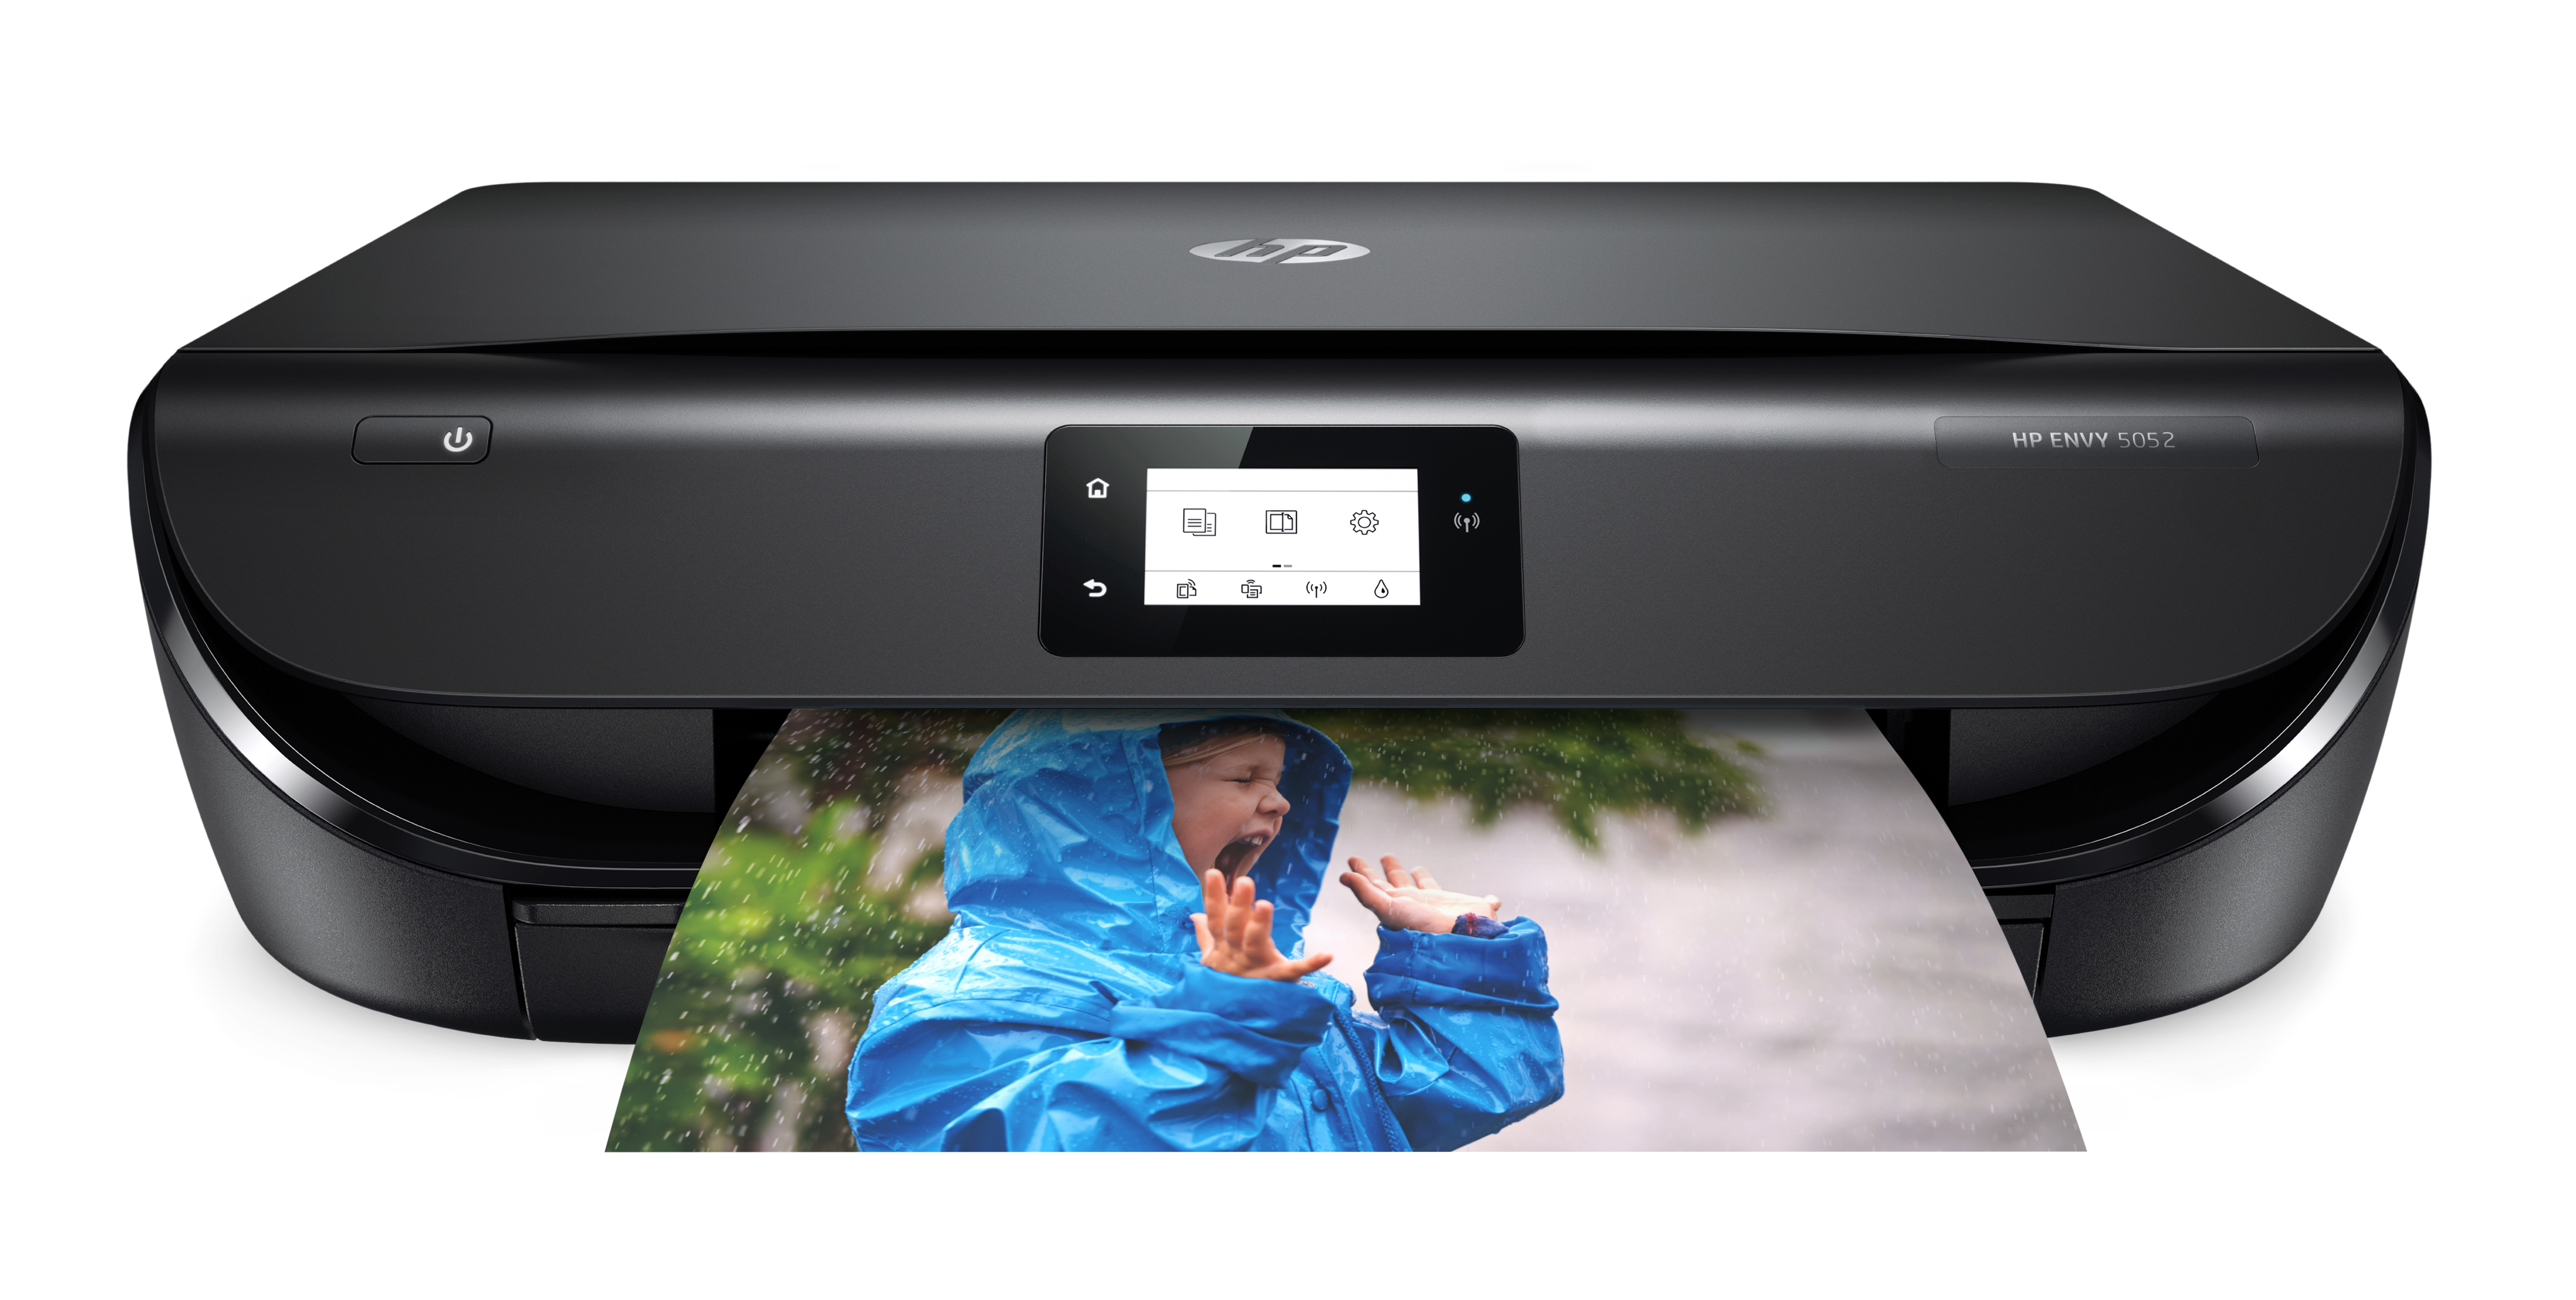 Hp Envy 5052 All-In-One Wireless Color Inkjet Printer (M2U92A) Dual Band Wifi Borderless Photos, Auto 2-Sided Printing, Black - image 1 of 9